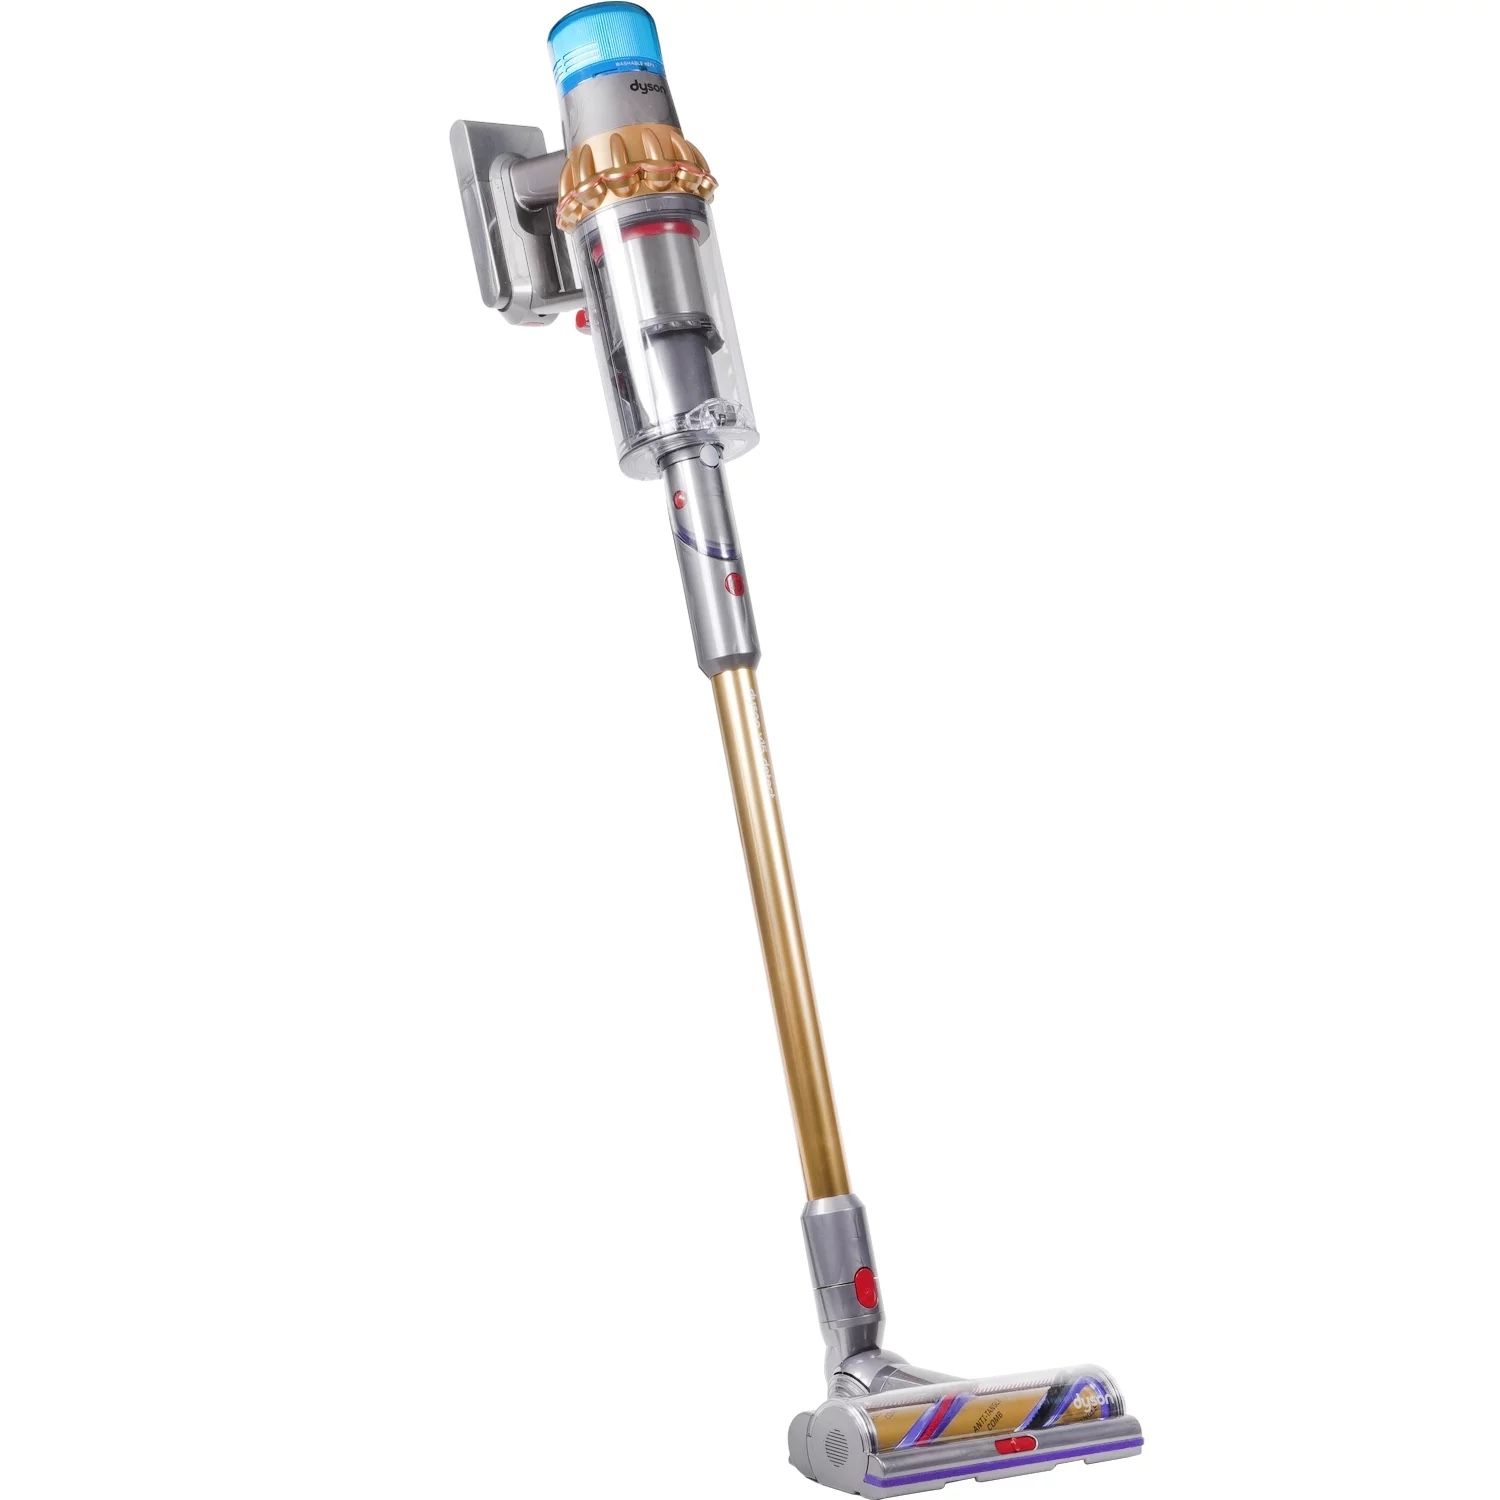 Dyson V15 Detect Absolute Vacuum Brand New